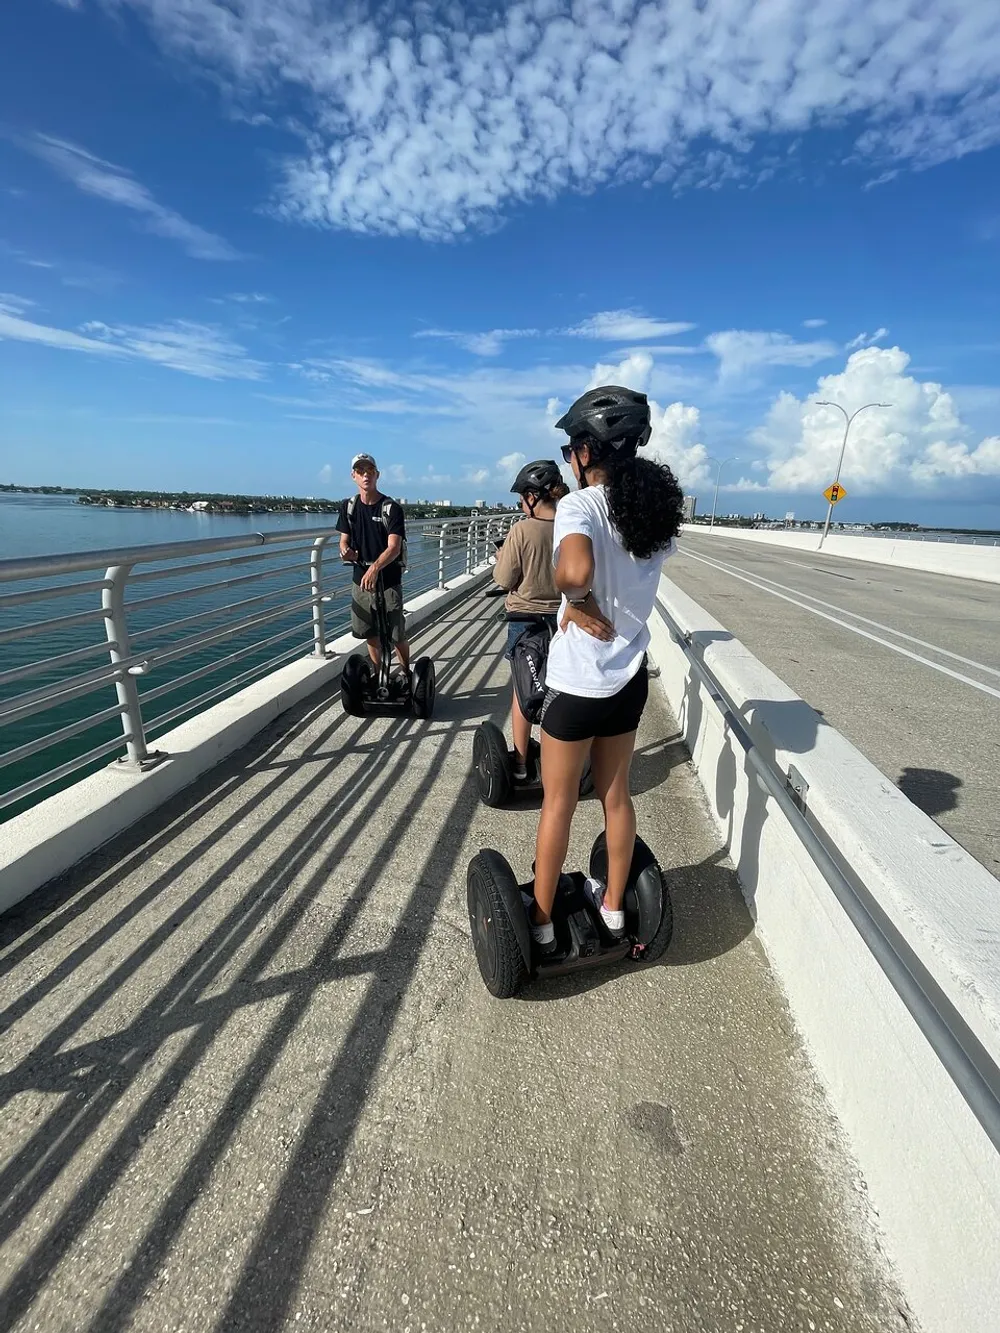 Three people are riding Segways on a sunny bridge over water with a clear blue sky above